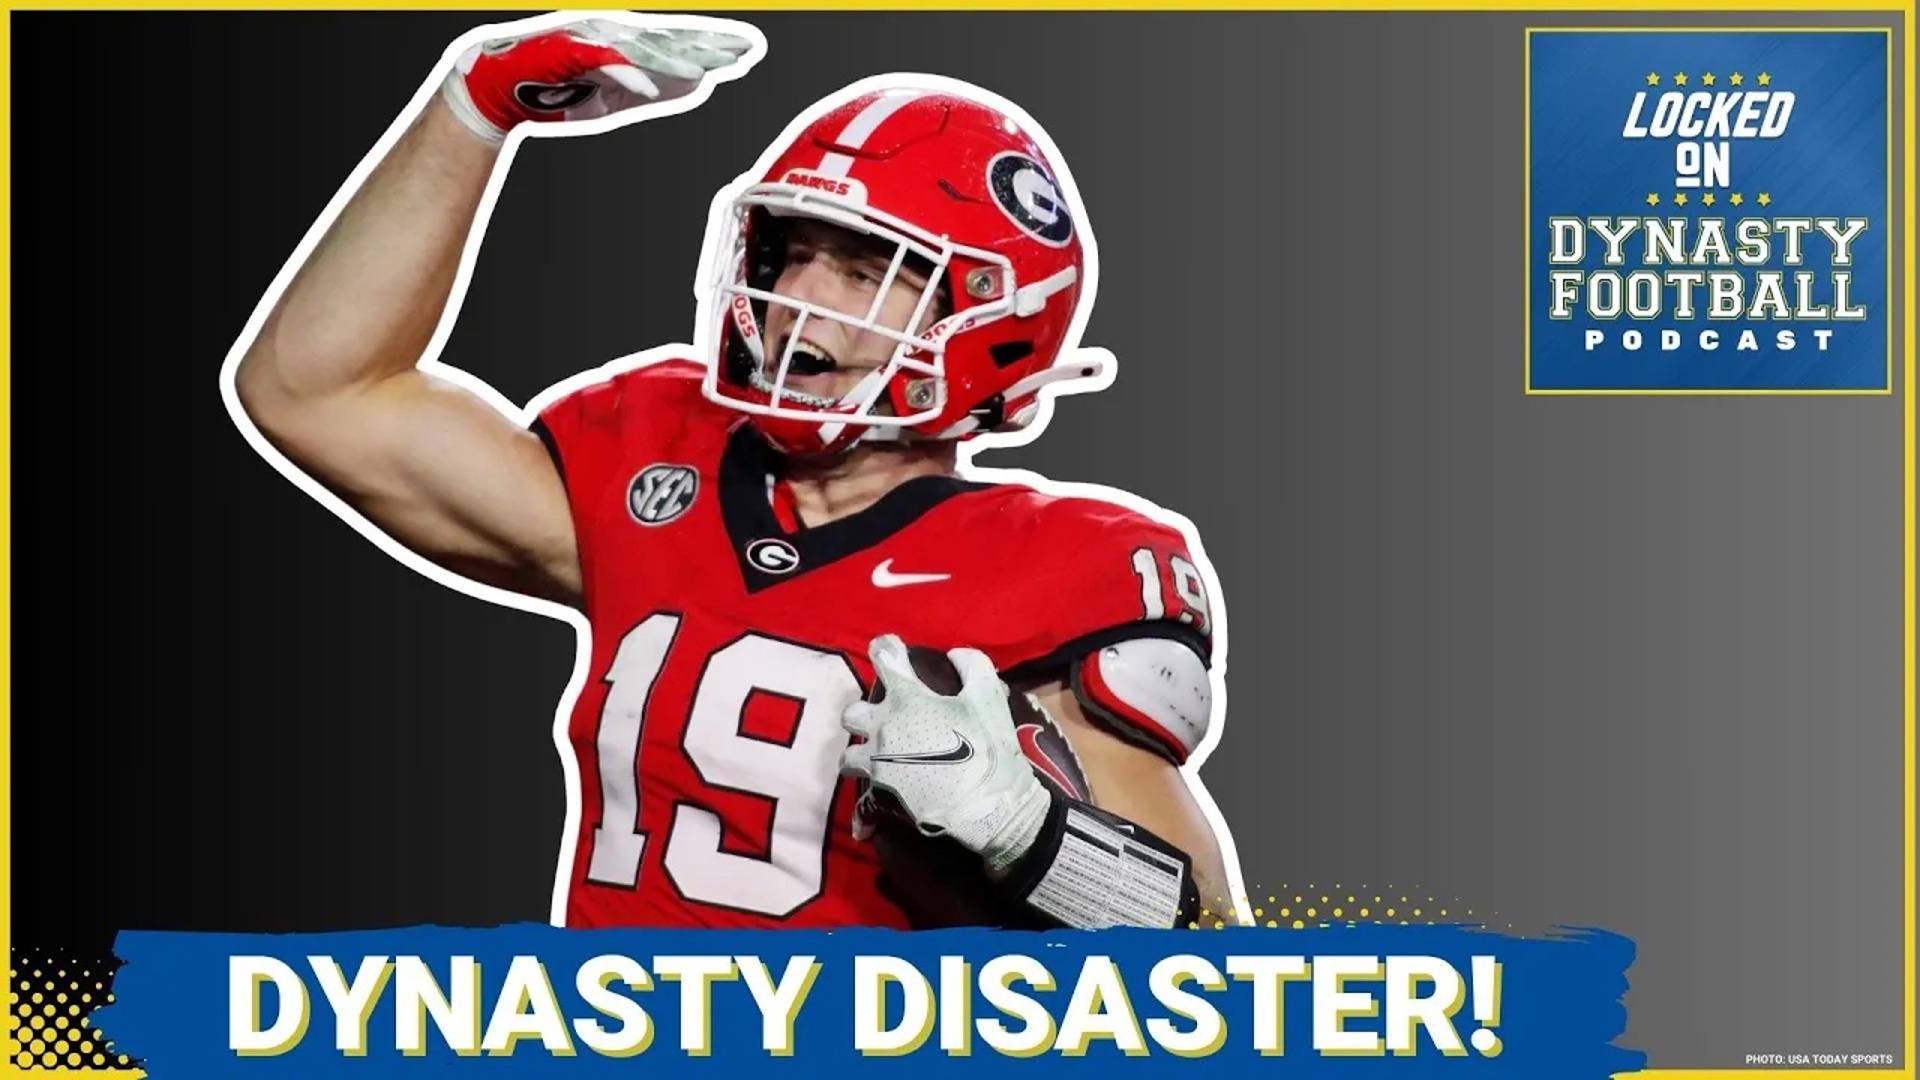 Georgia TE Brock Bowers was arguably the No. 1 tight end in dynasty leagues heading into the NFL Draft. But how much value did he lose?